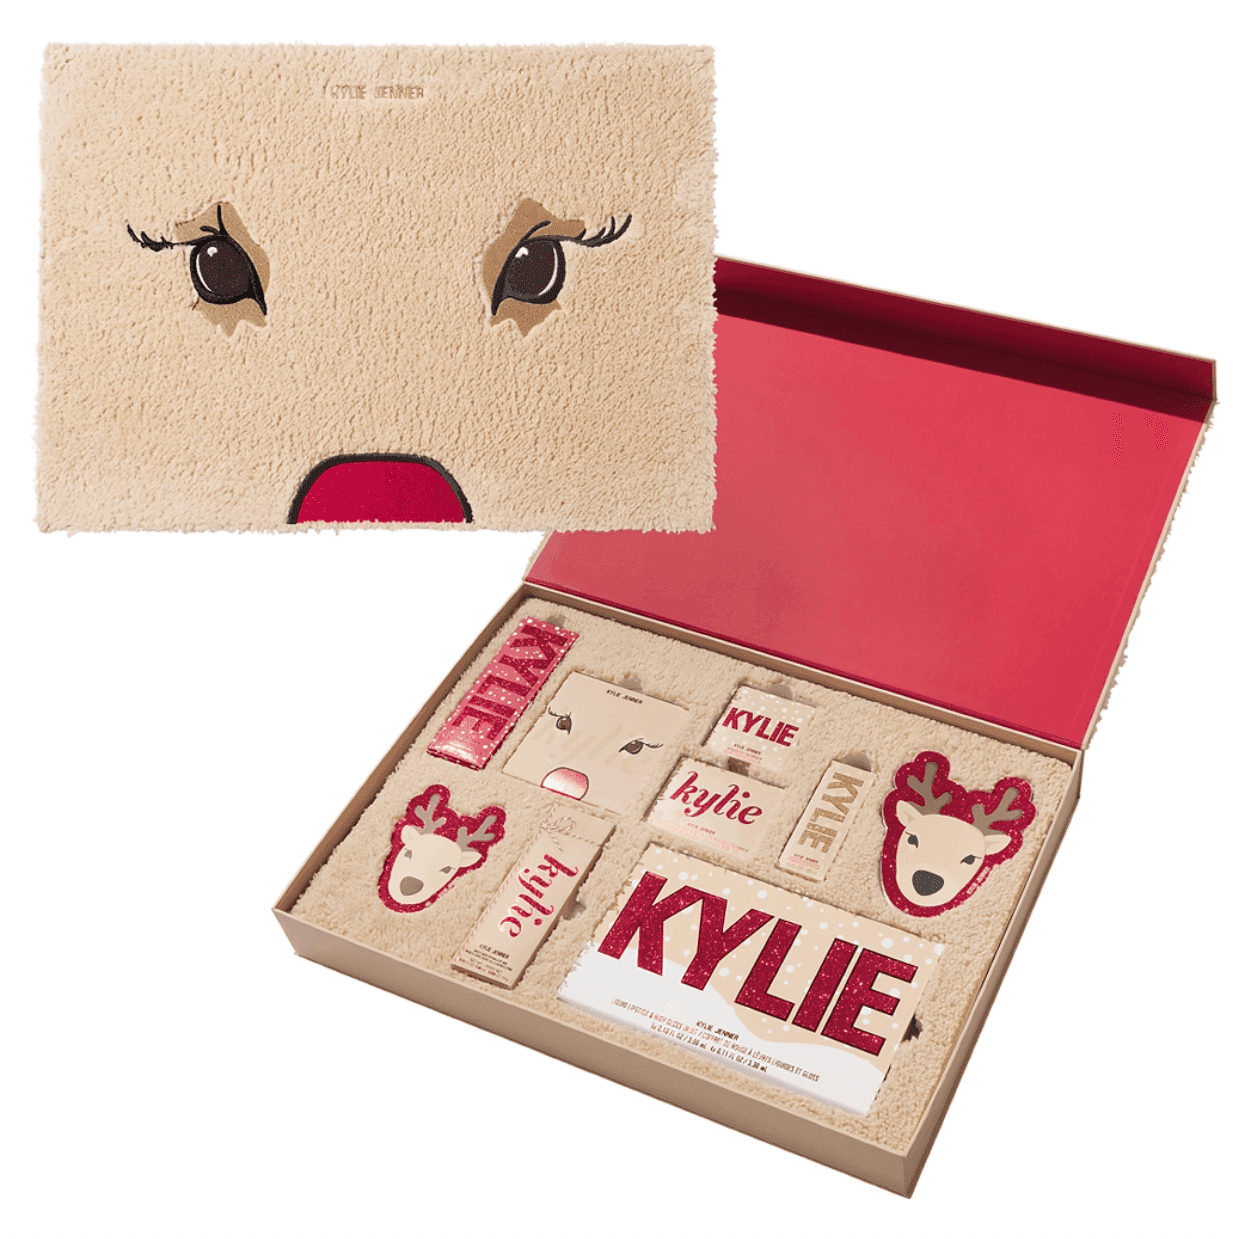 Kylie Collection holiday box